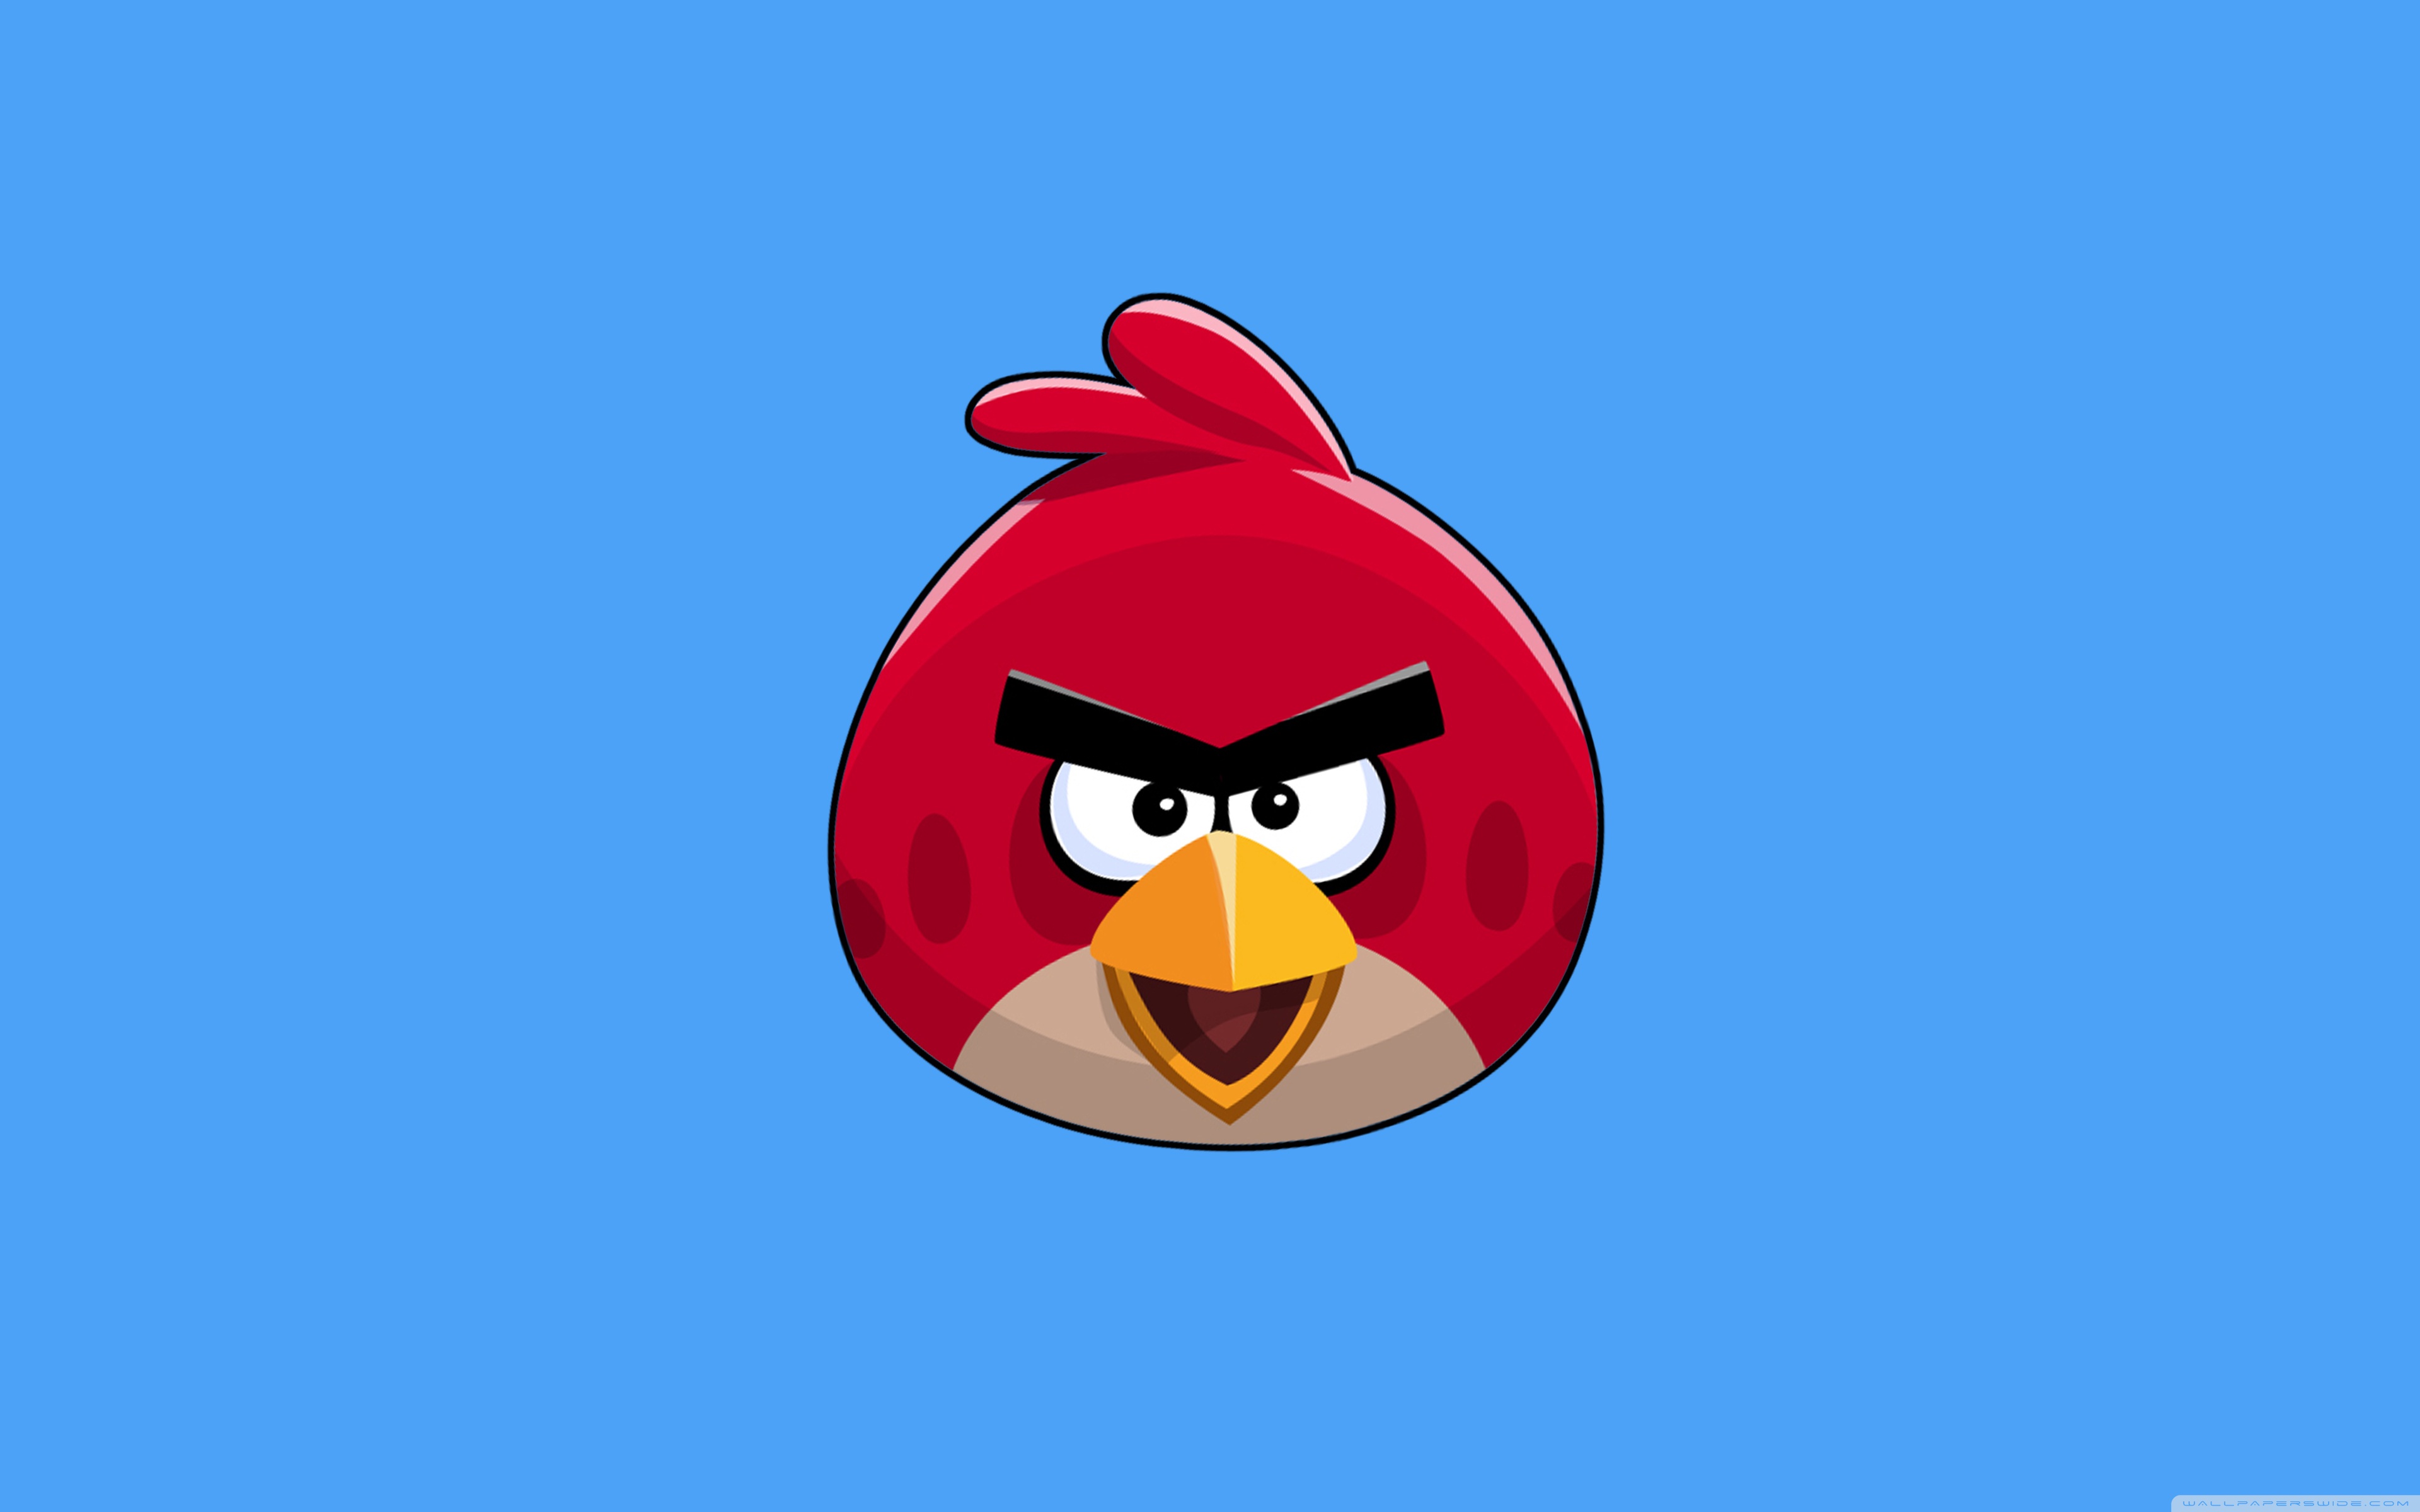 Angry birds hd wallpapers